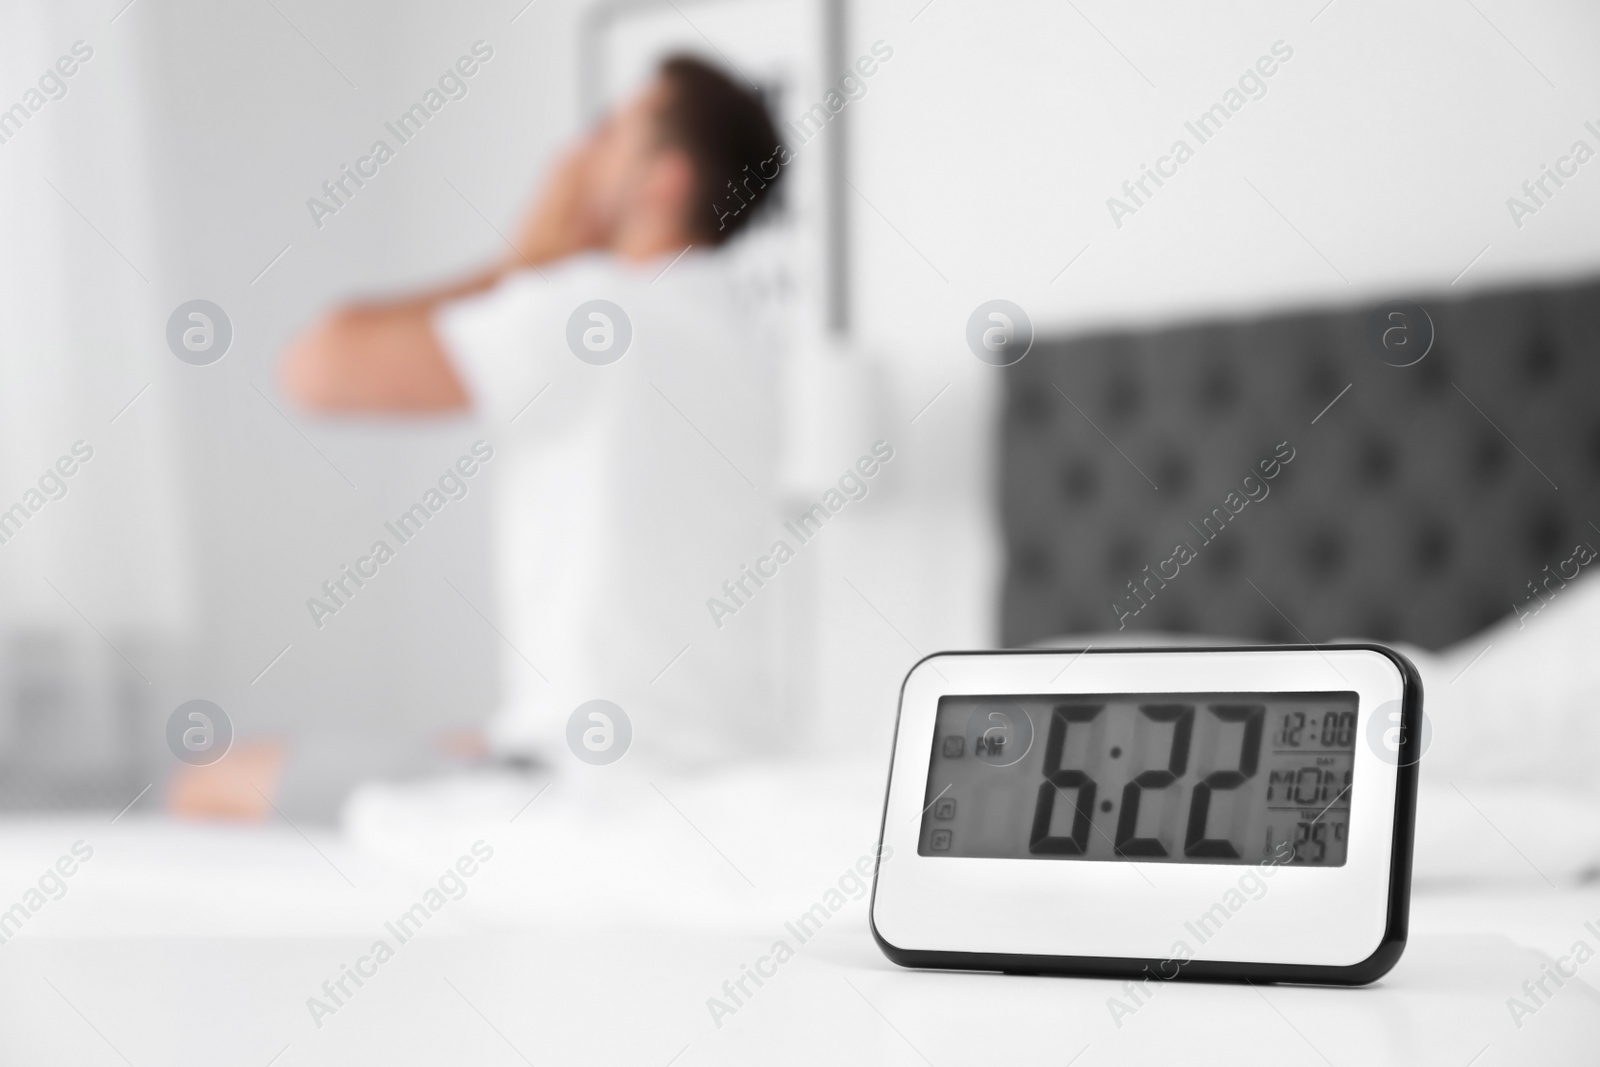 Photo of Digital alarm clock and blurred man on background. Time of day